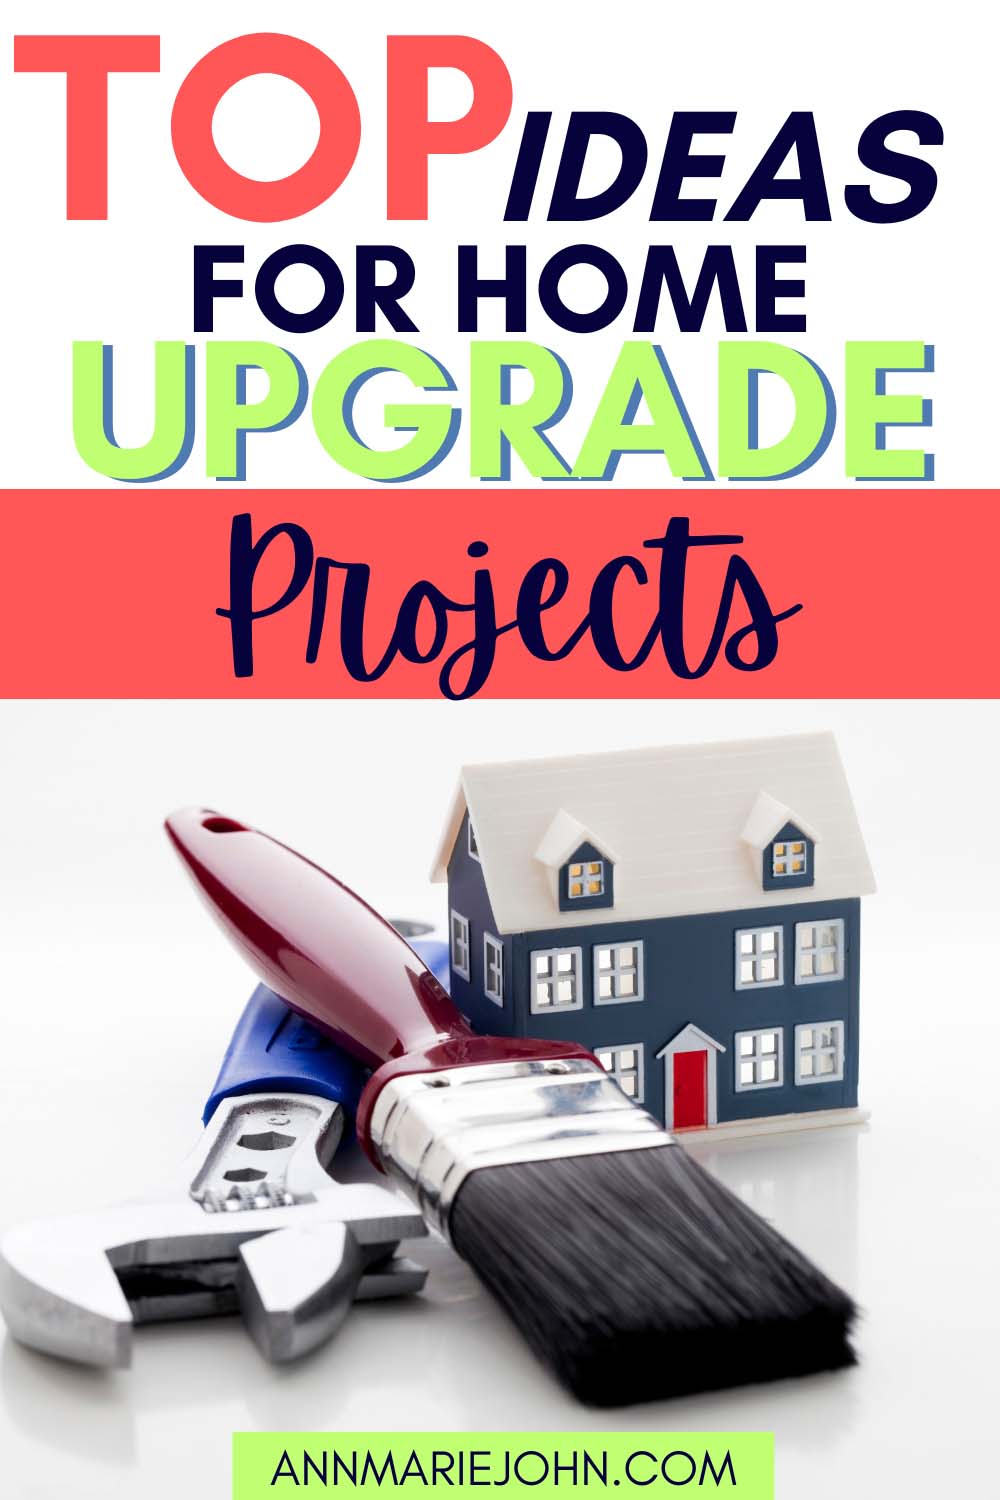 Top Ideas for Home Upgrade Projects